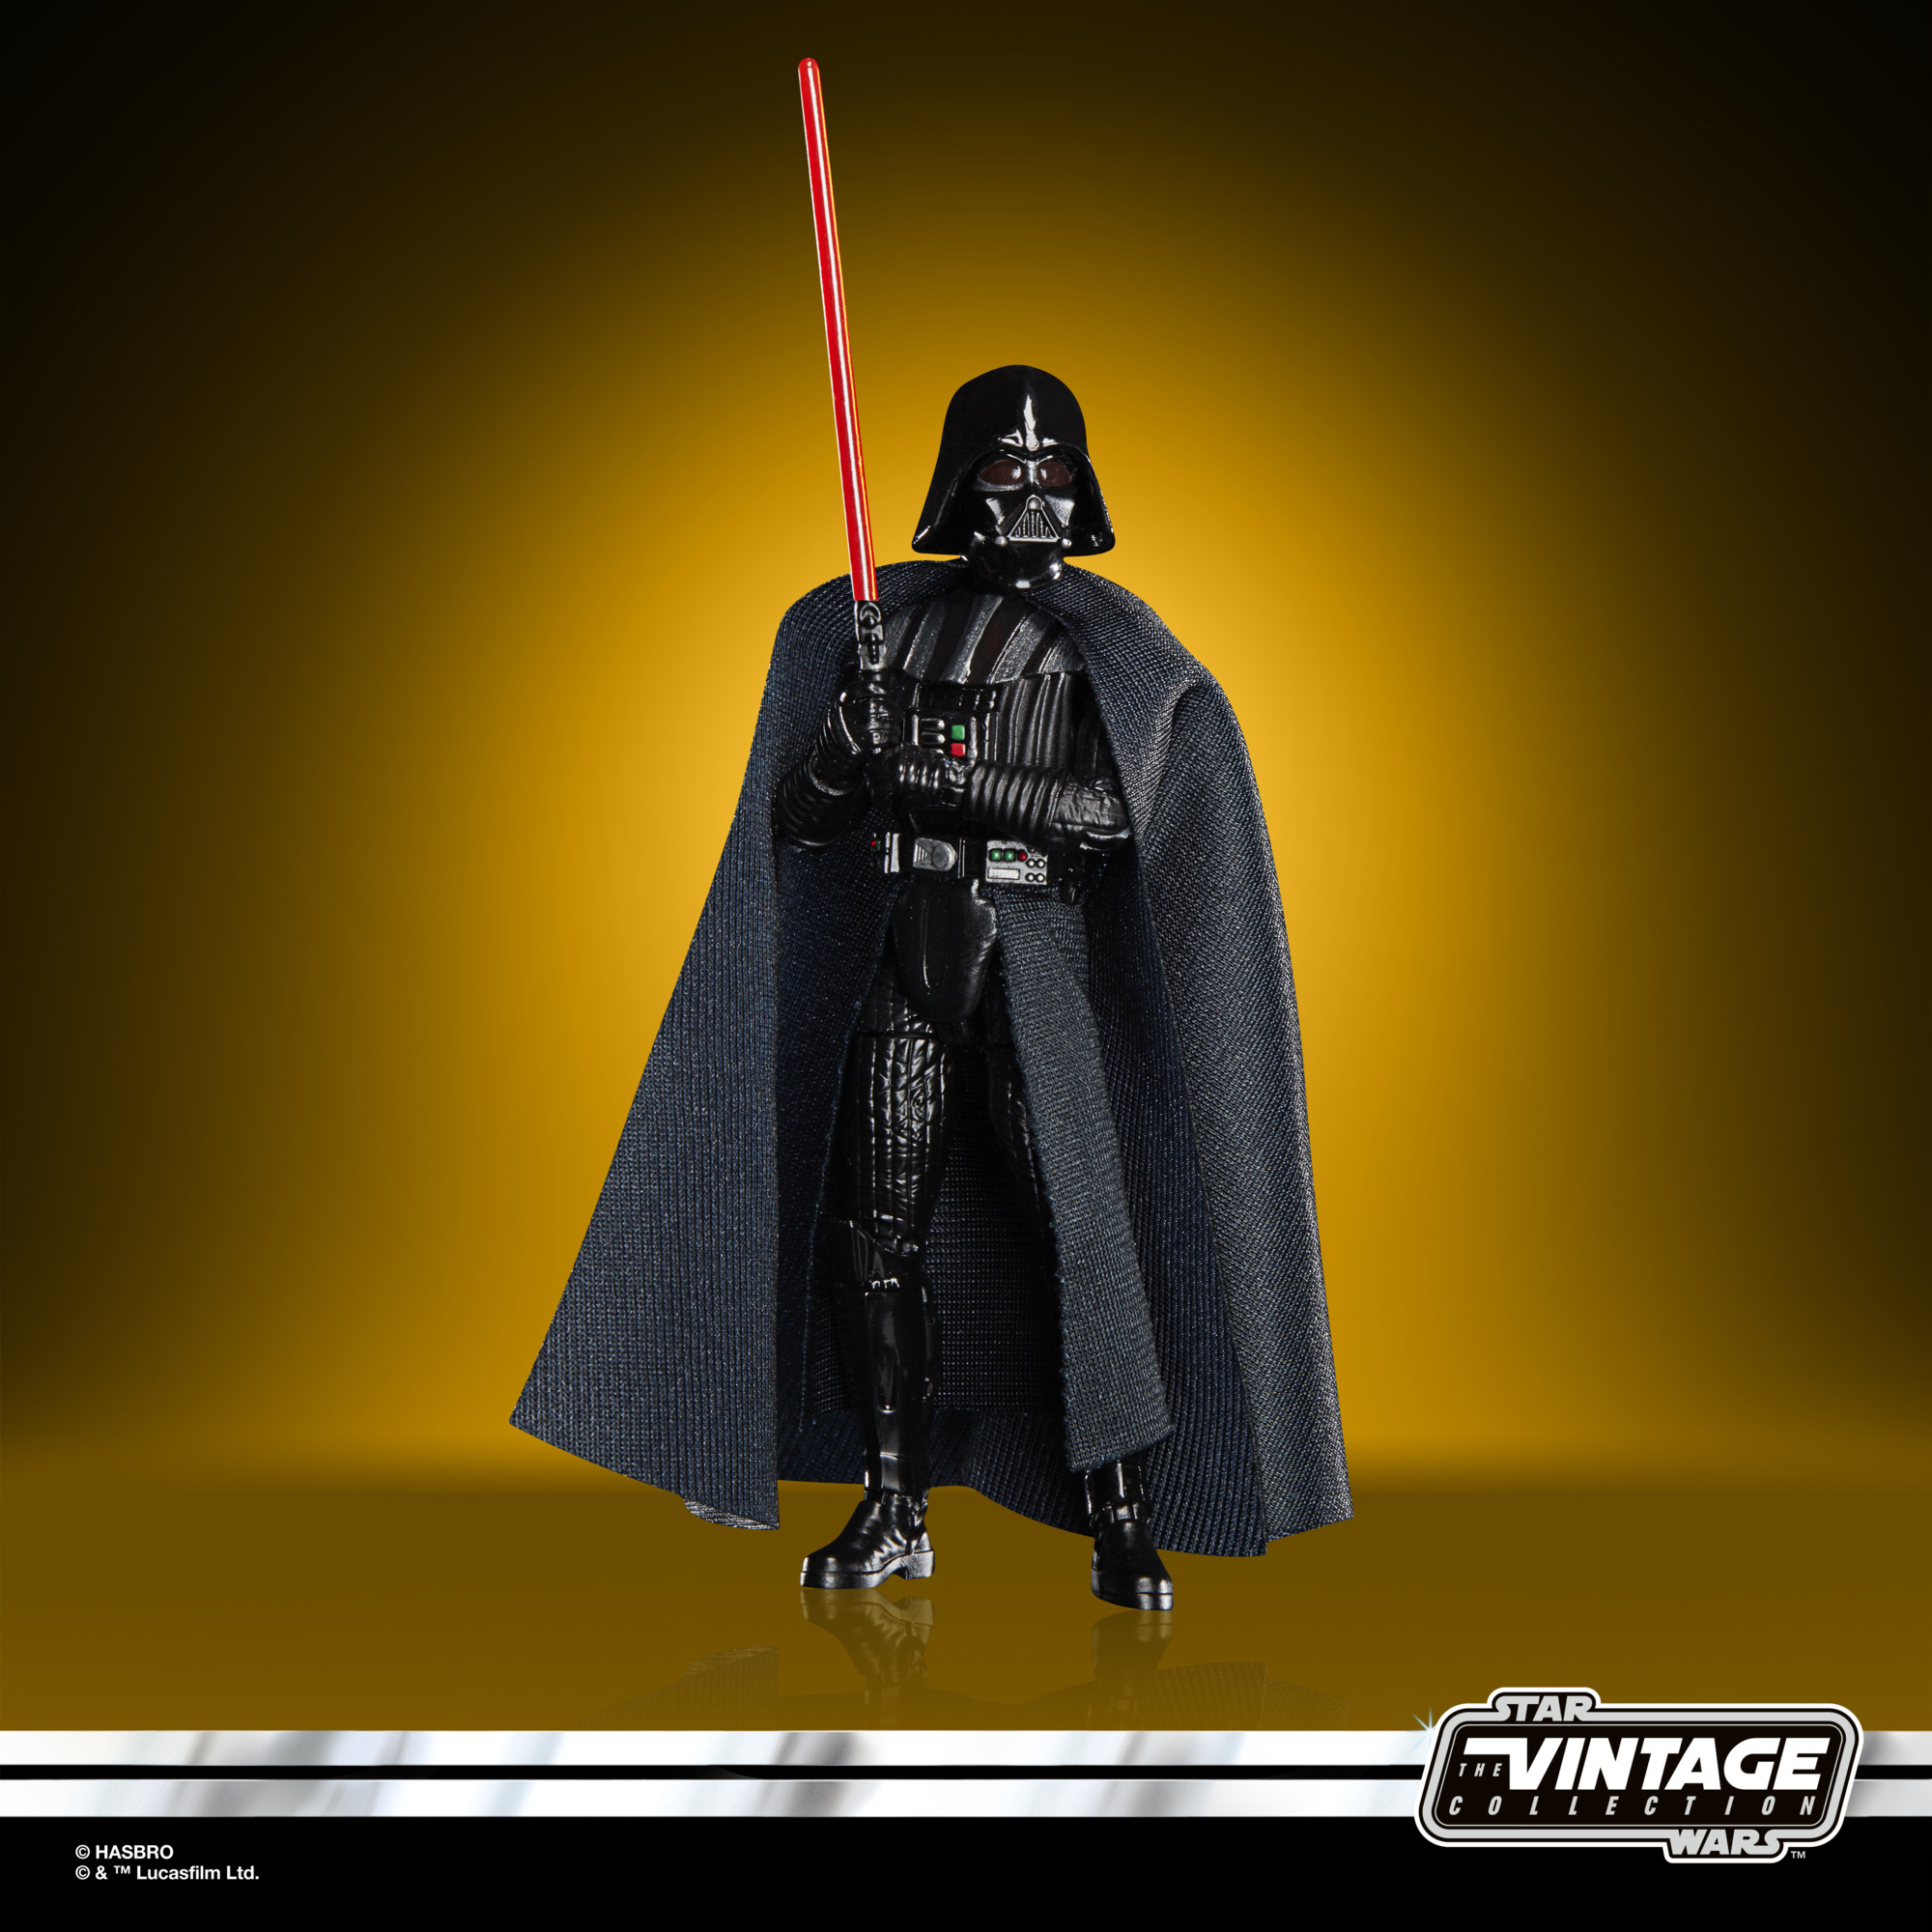 Star Wars The Vintage Collection Darth Vader (The Dark Times) F44755X0 5010994152079 